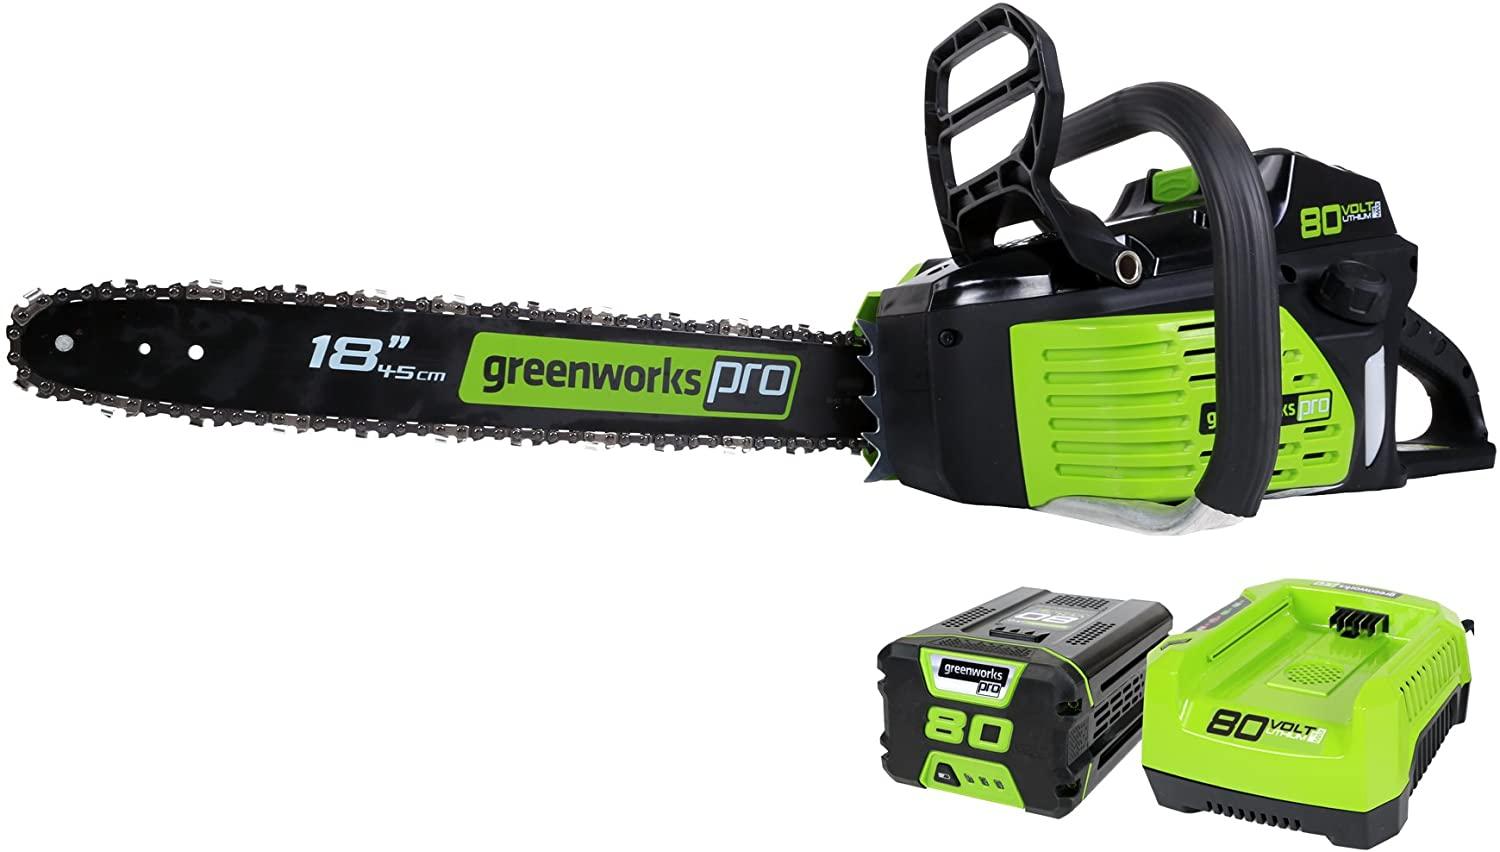 Greenworks PRO 18-Inch 80V Cordless Chainsaw for $244.87 Shipped